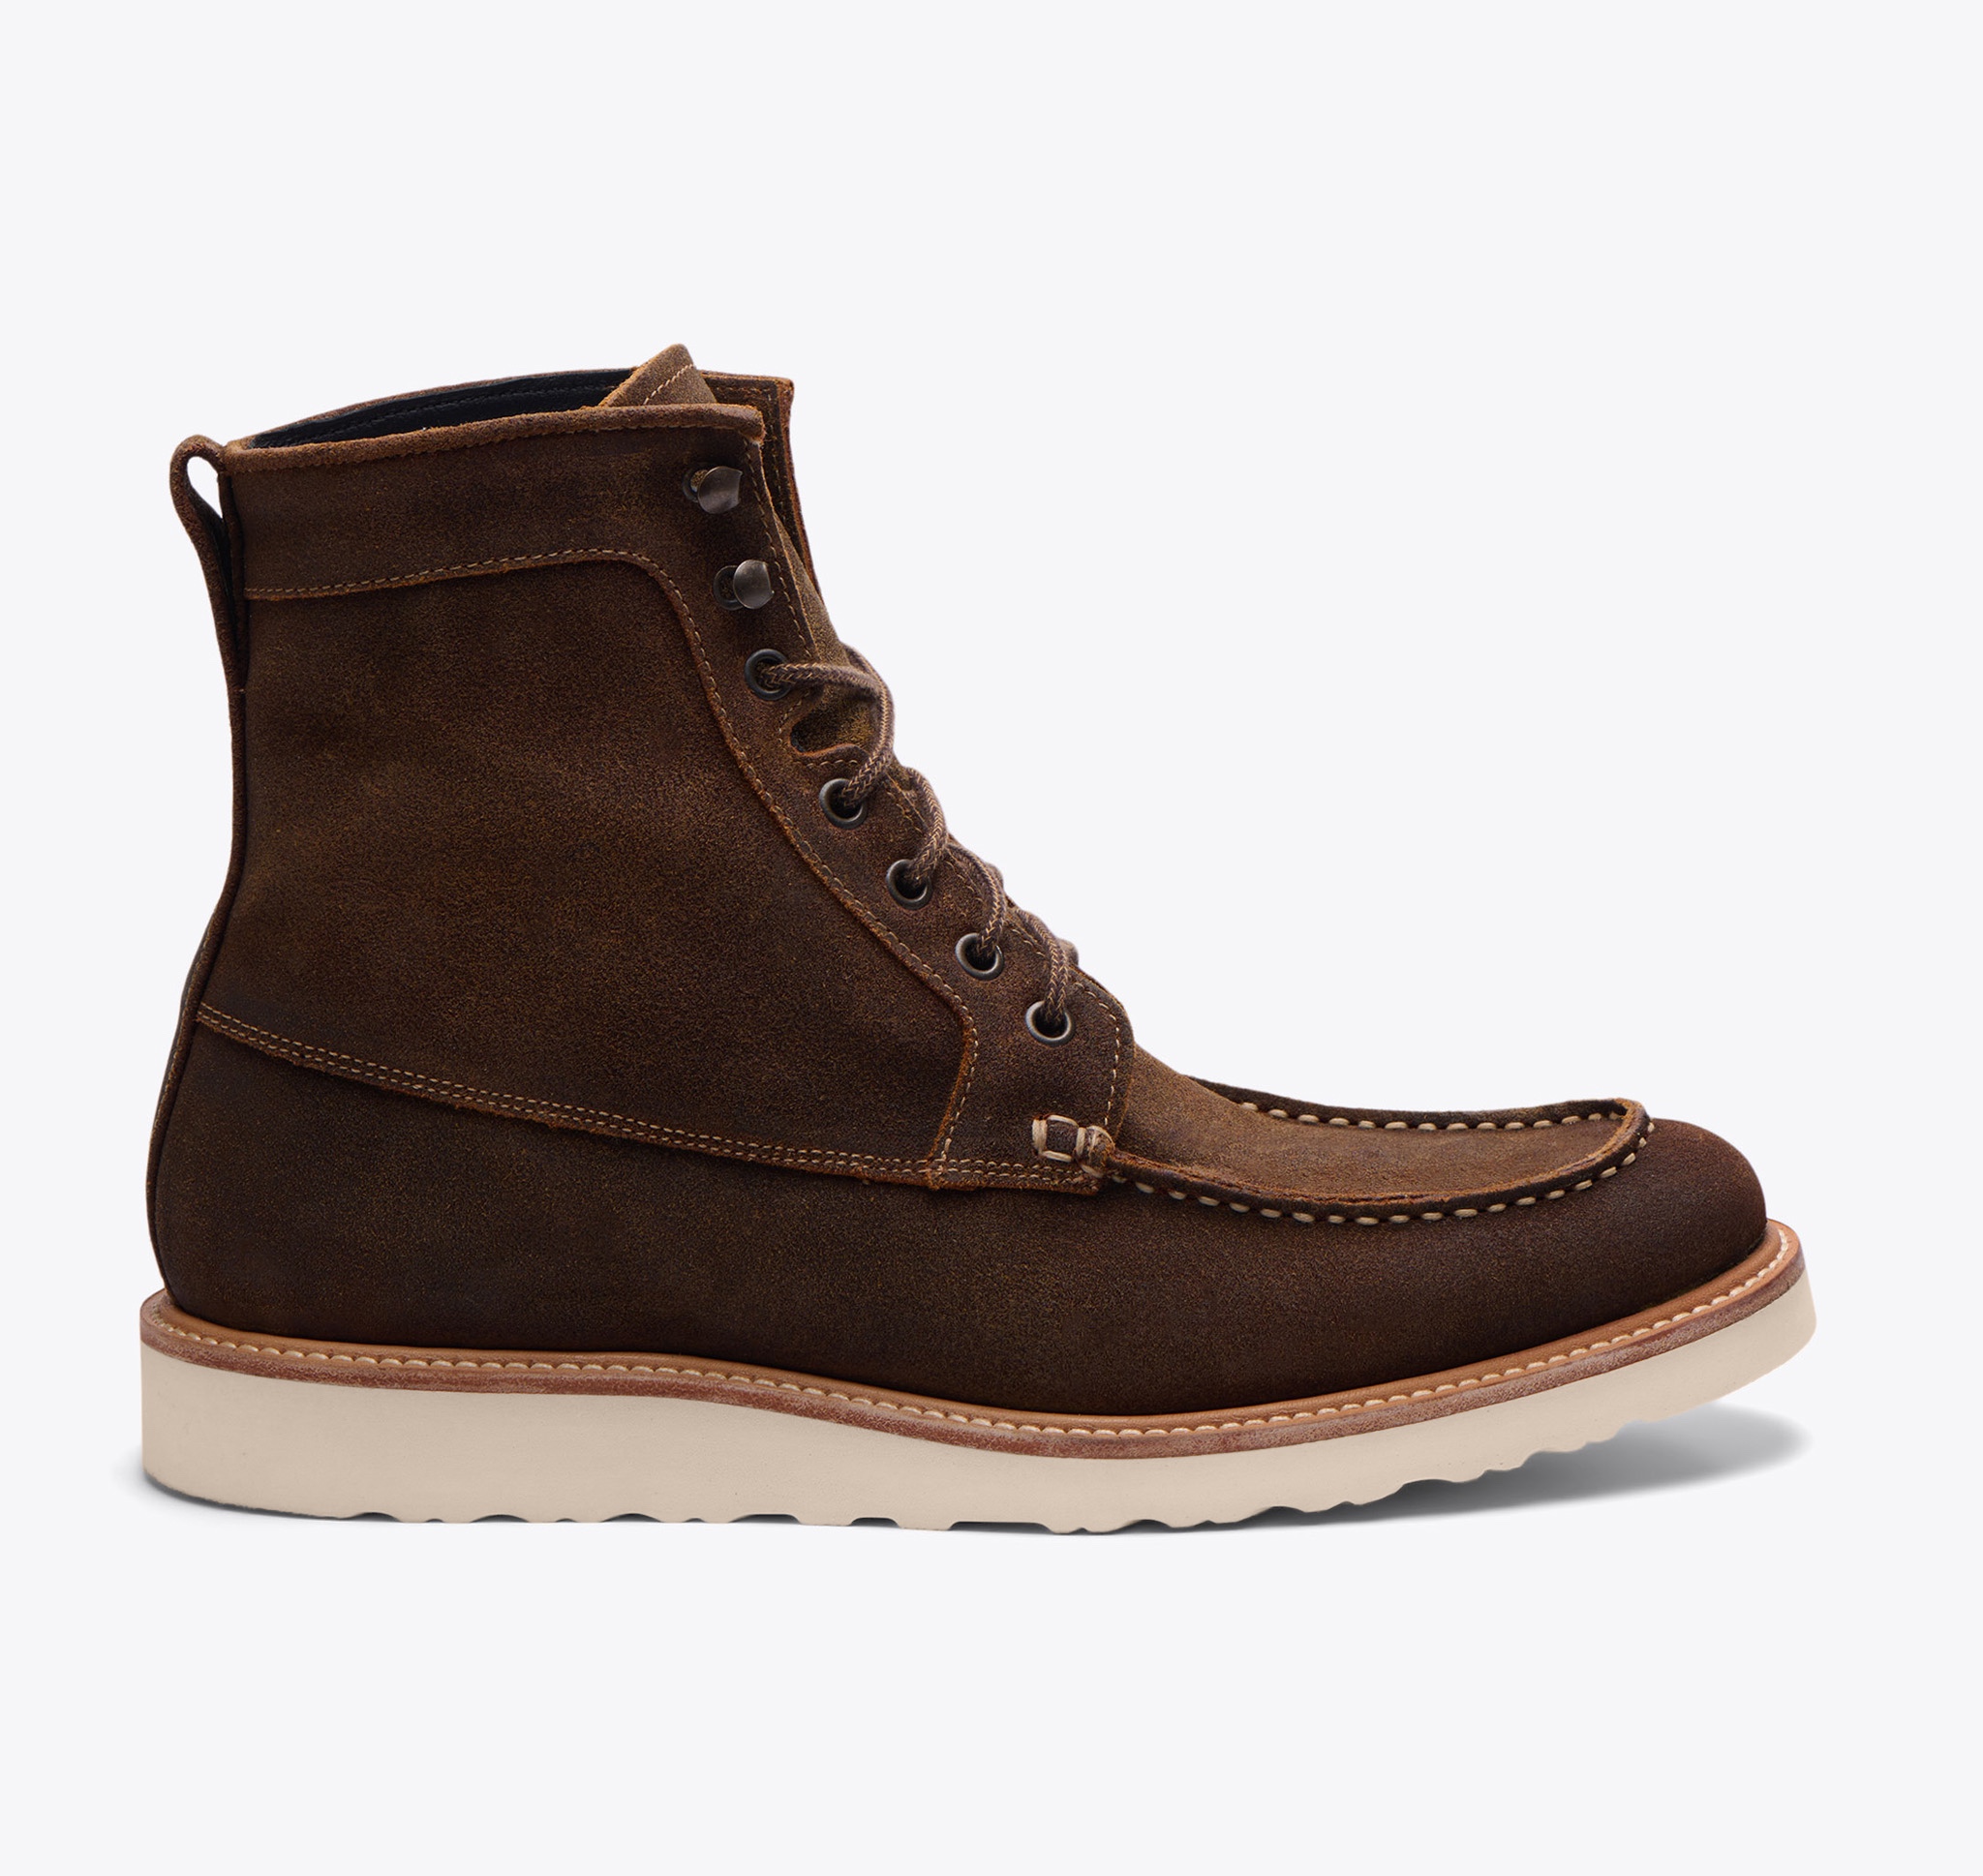 All-Weather Mateo Boot Waxed Brown — Nisolo